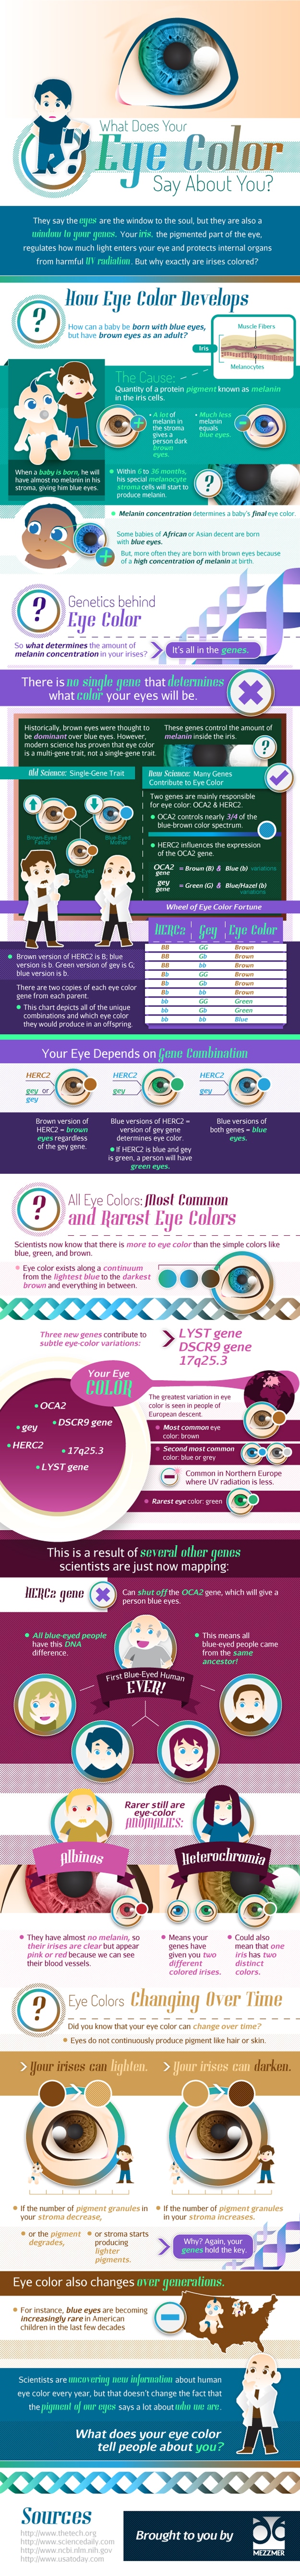 Science: What Your Eye Color Reveals About You